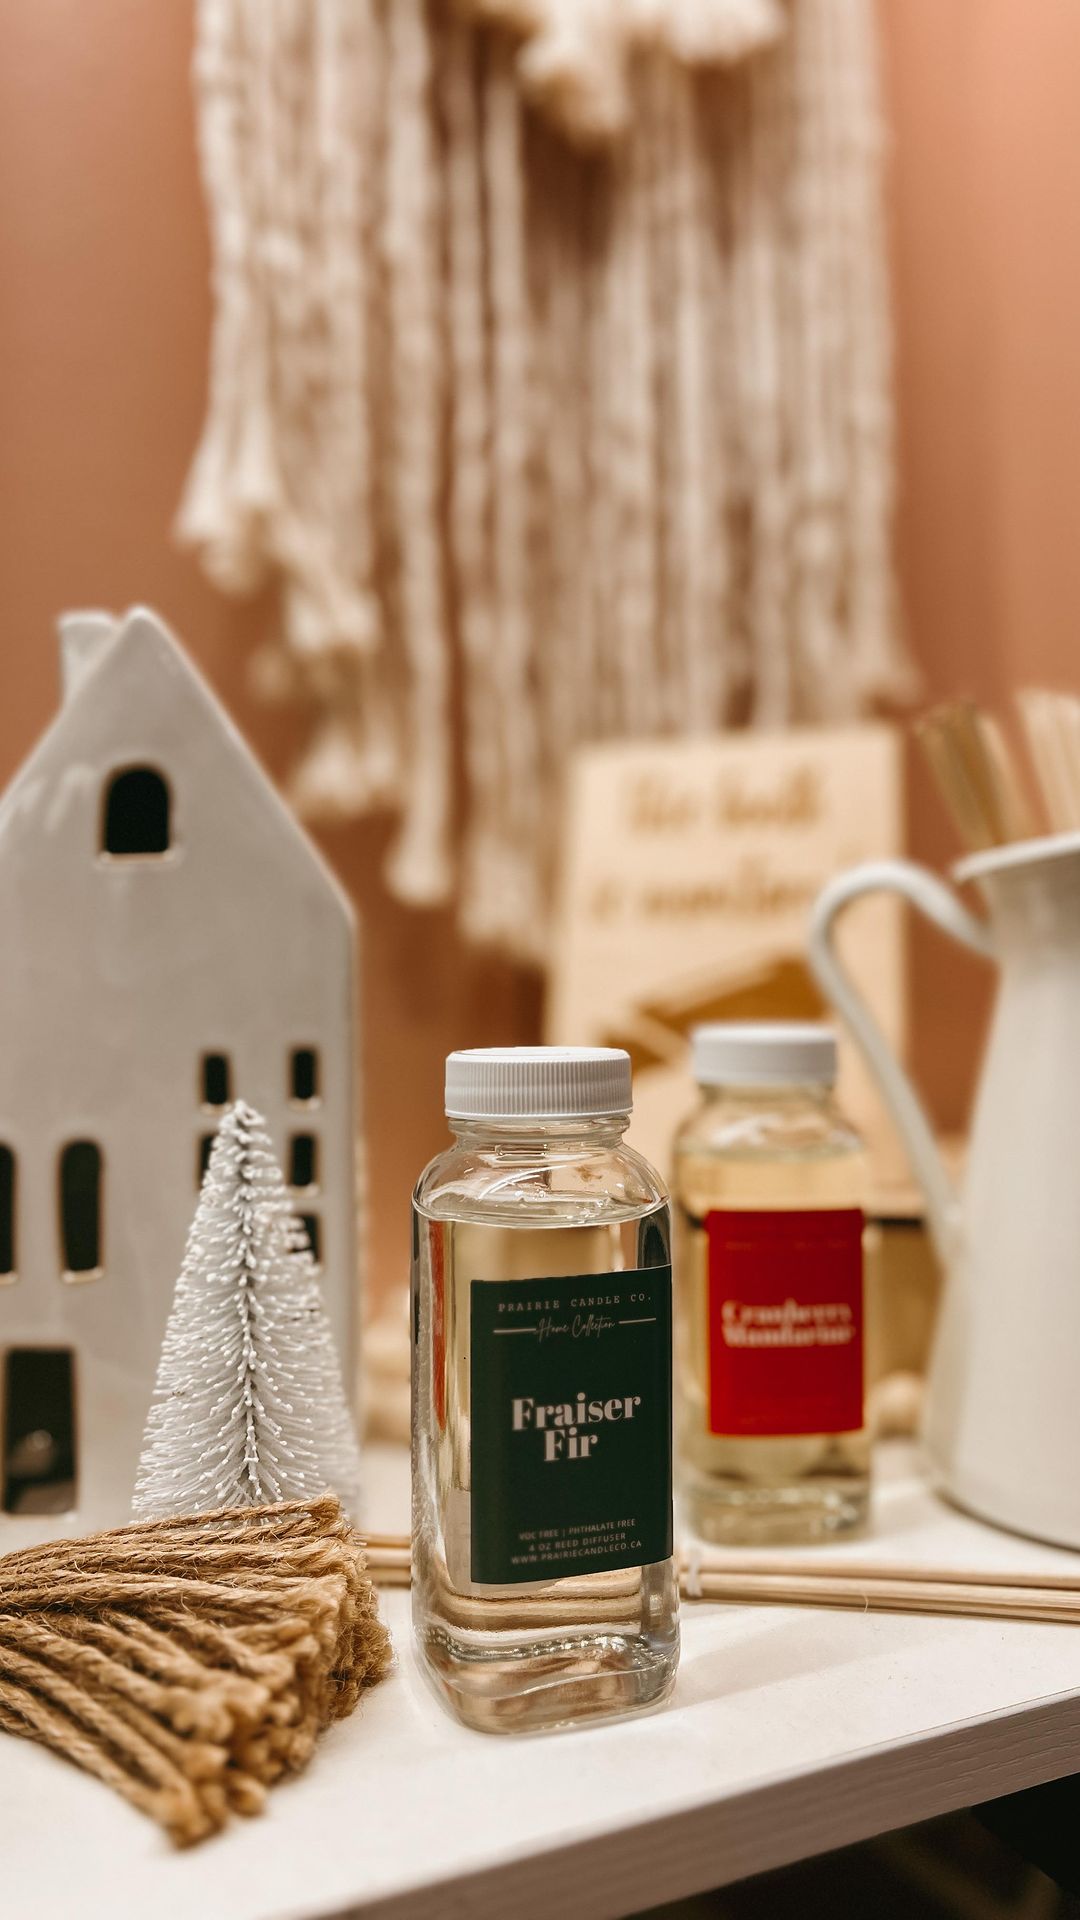 Holiday display at UNITE. In the foreground is a bottle of Fraiser Fir reed diffuser. In the background there is a white fir tree and a ceramic model of a white home.